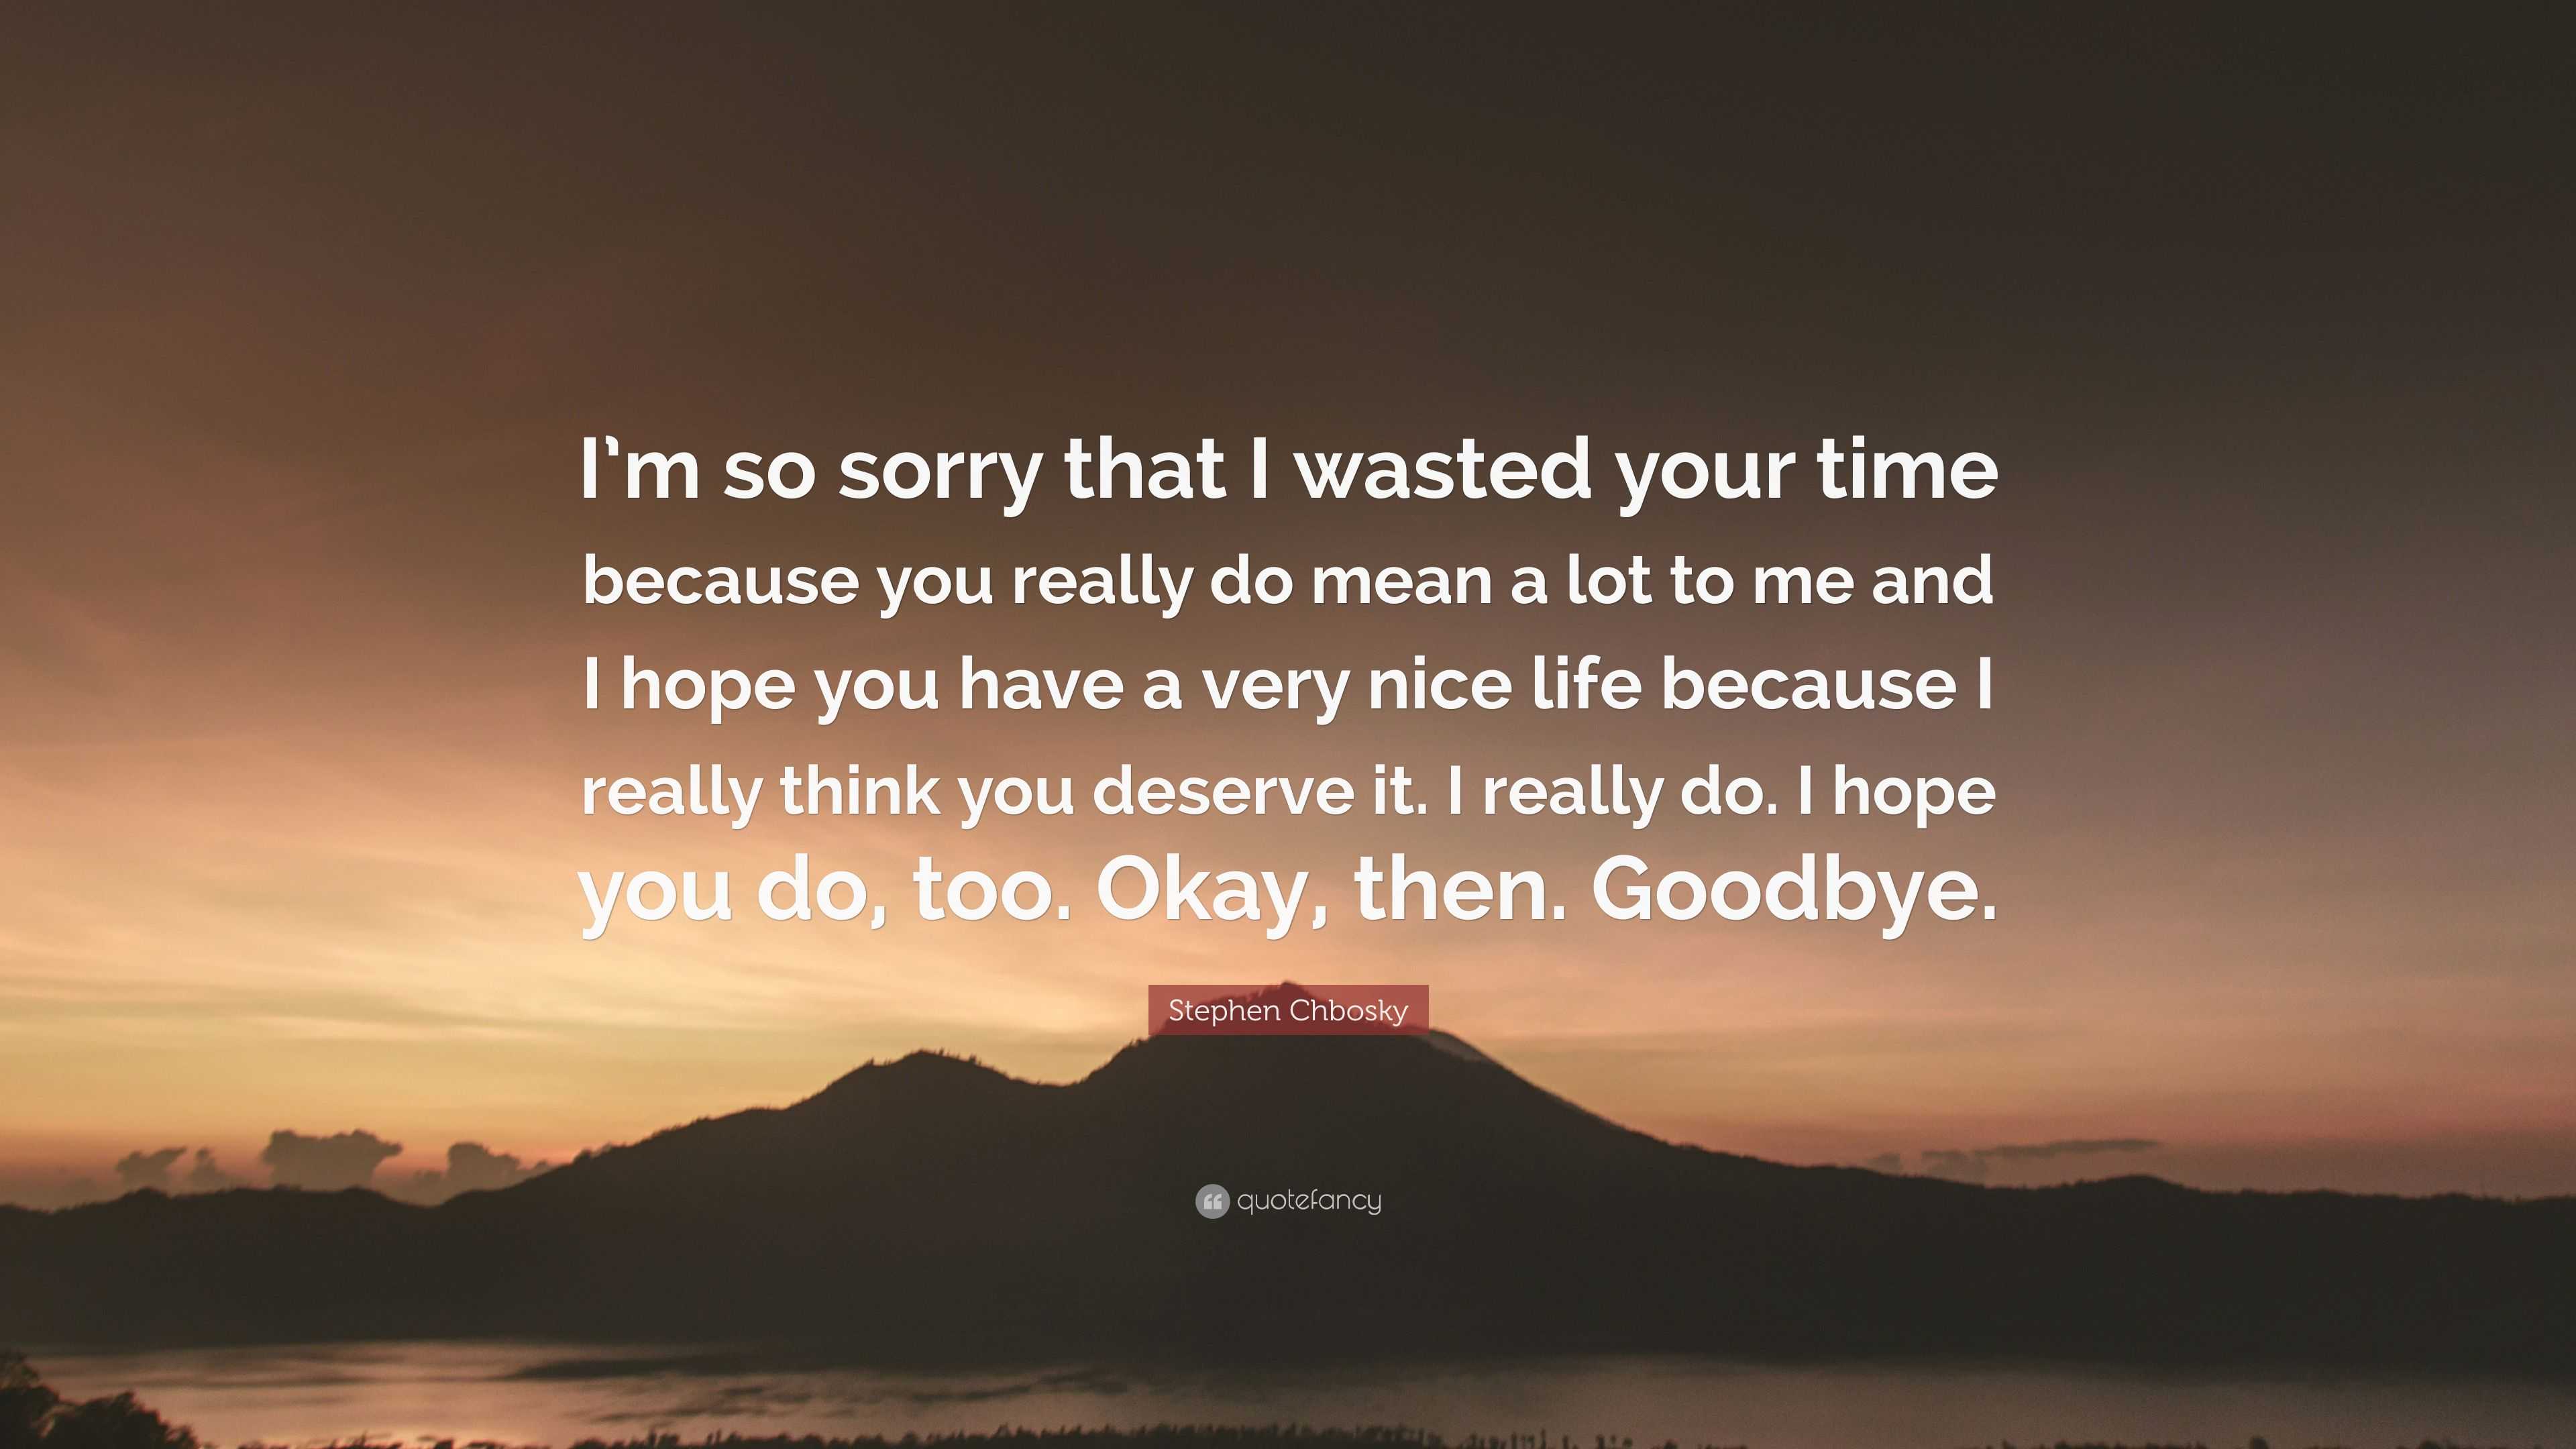 Stephen Chbosky Quote “I’m so sorry that I wasted your time because